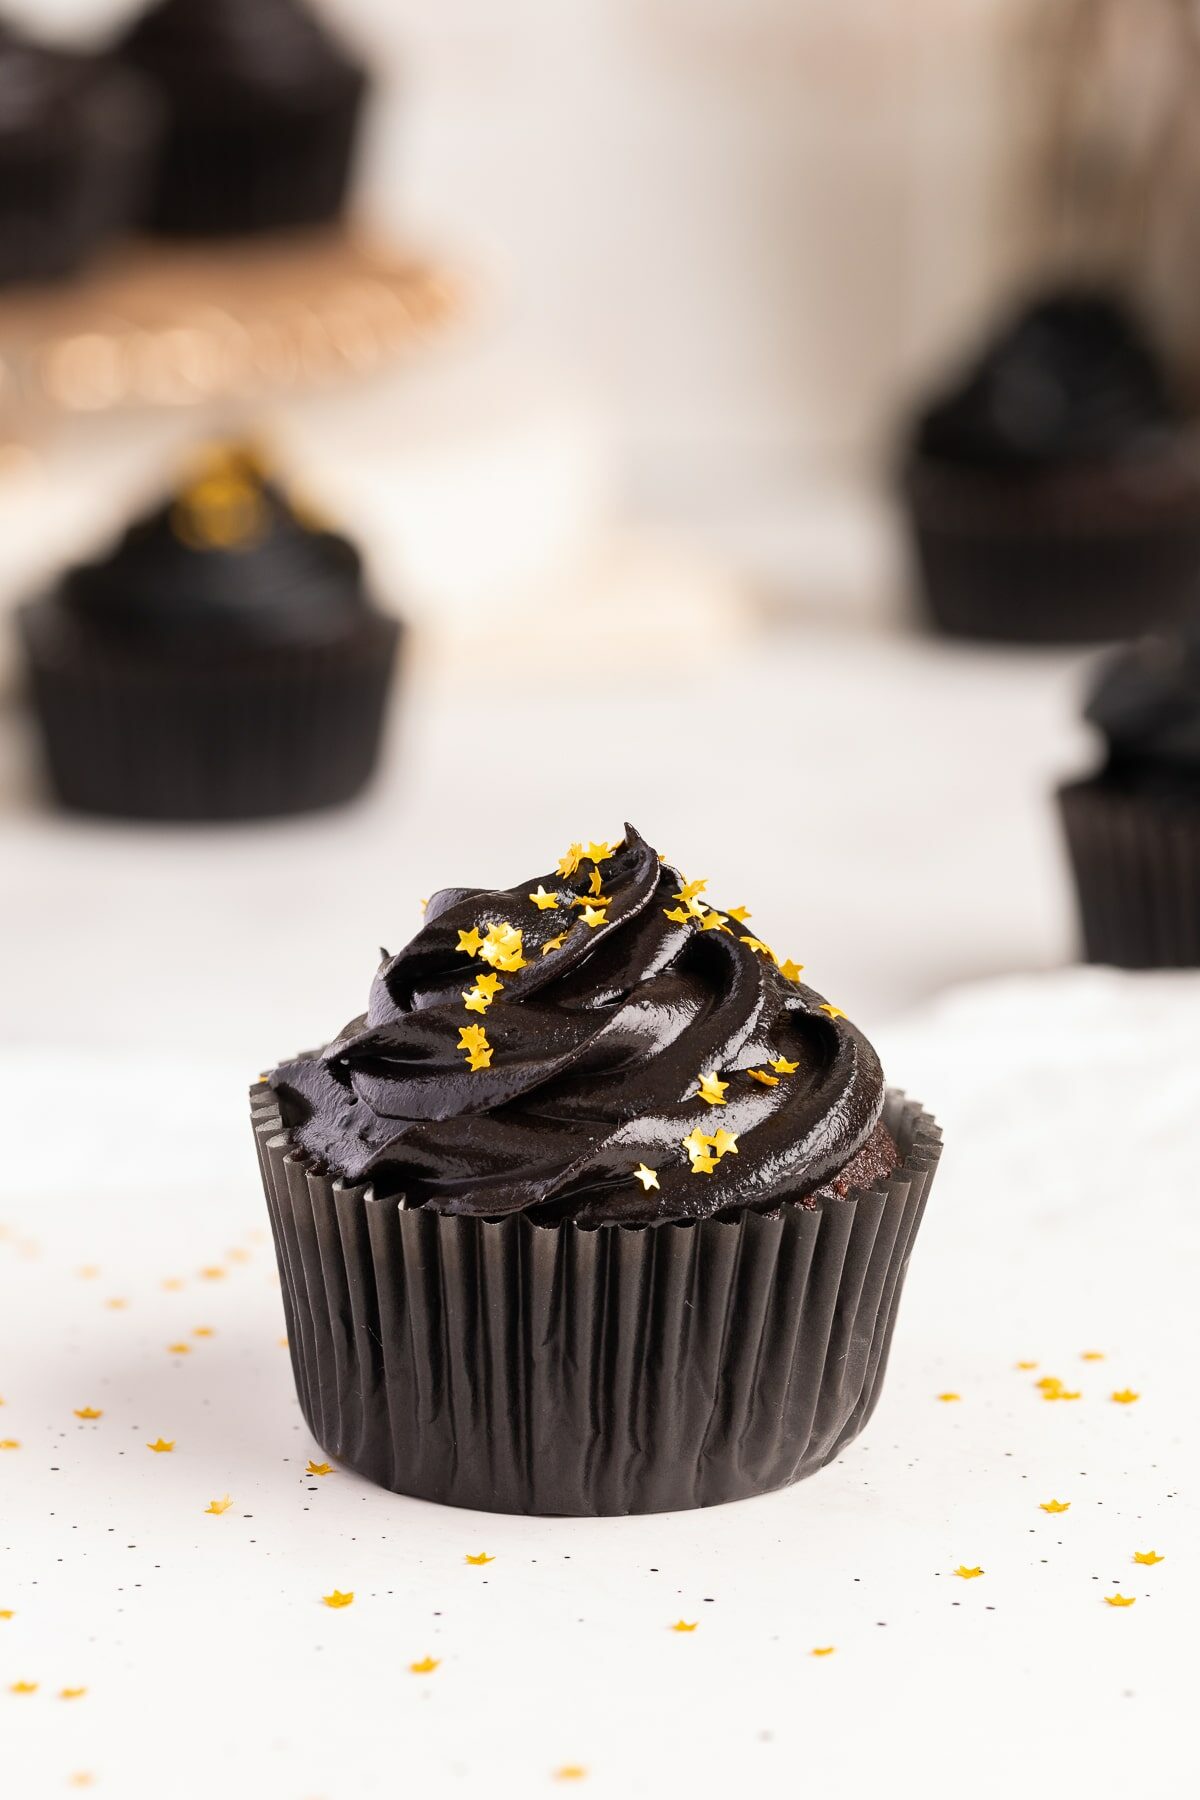 black frosting made with black cocoa powder on cupcake.